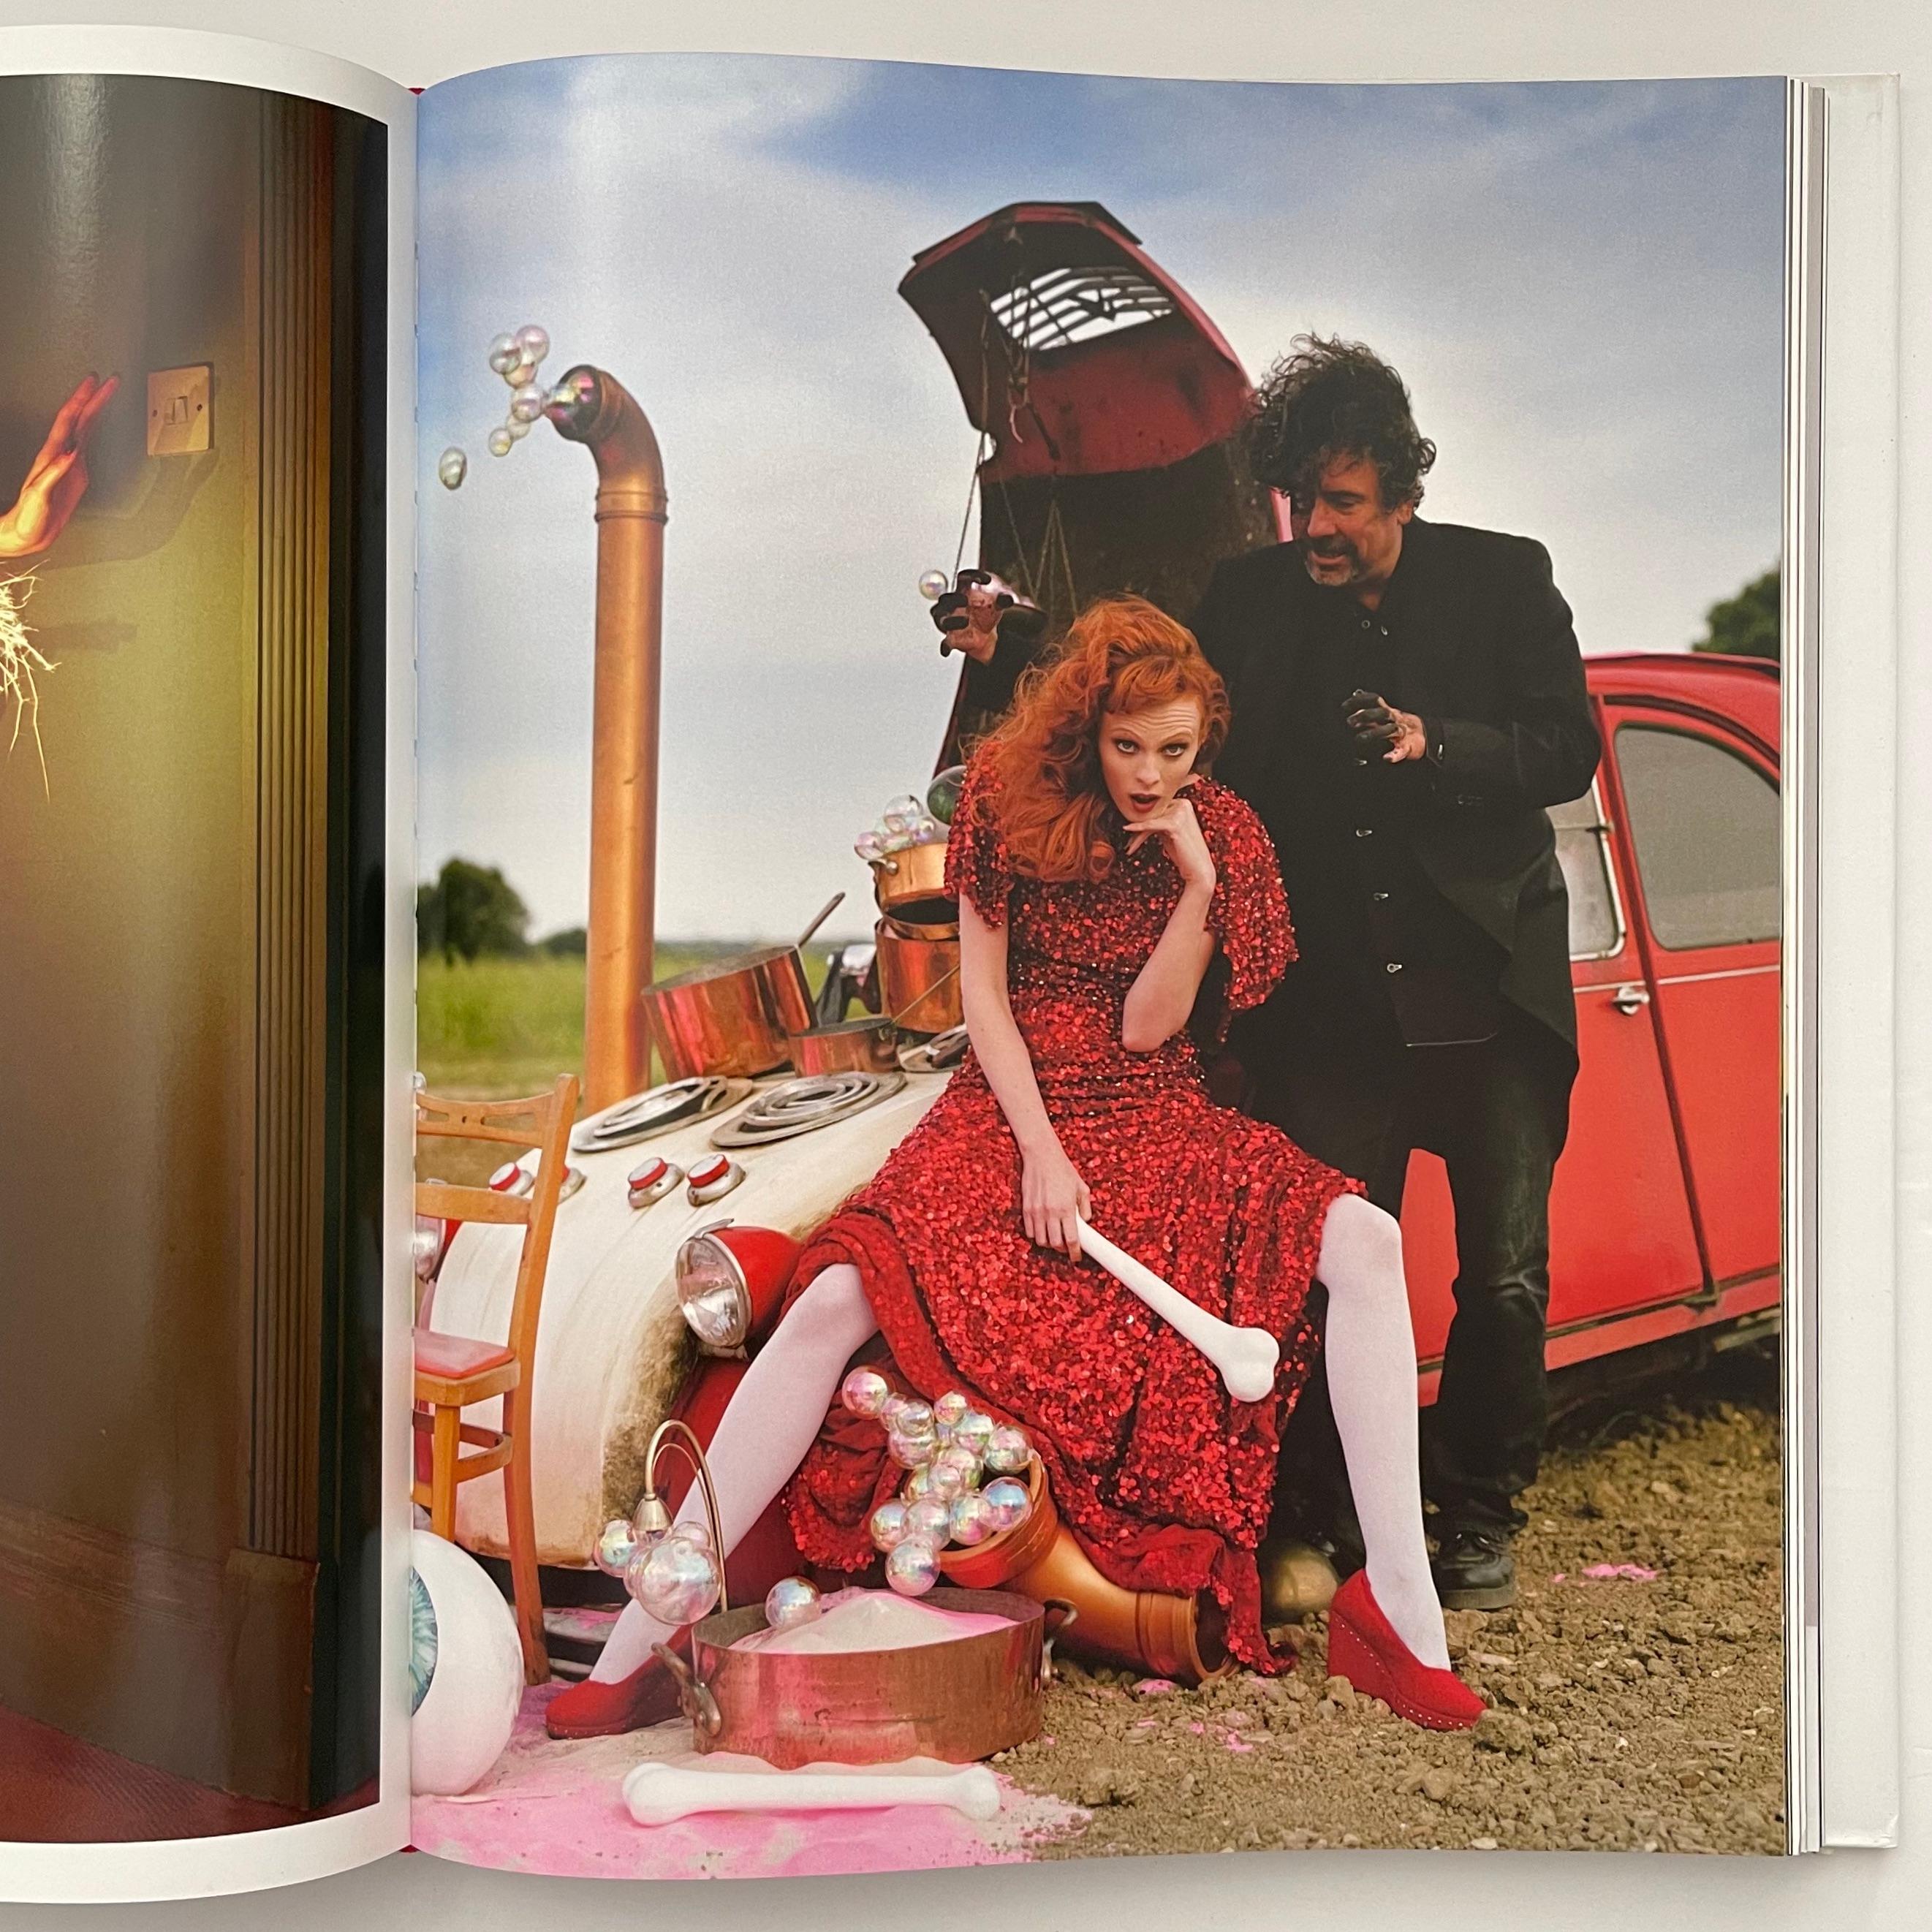 Tim Walker, Story Teller
Published by Thames & Hudson, 2017.

When one of the most visually exciting photographers of our times turns fashion stories into fairy tales, the results are unmistakable and inimitable. Though they may soar in scale and